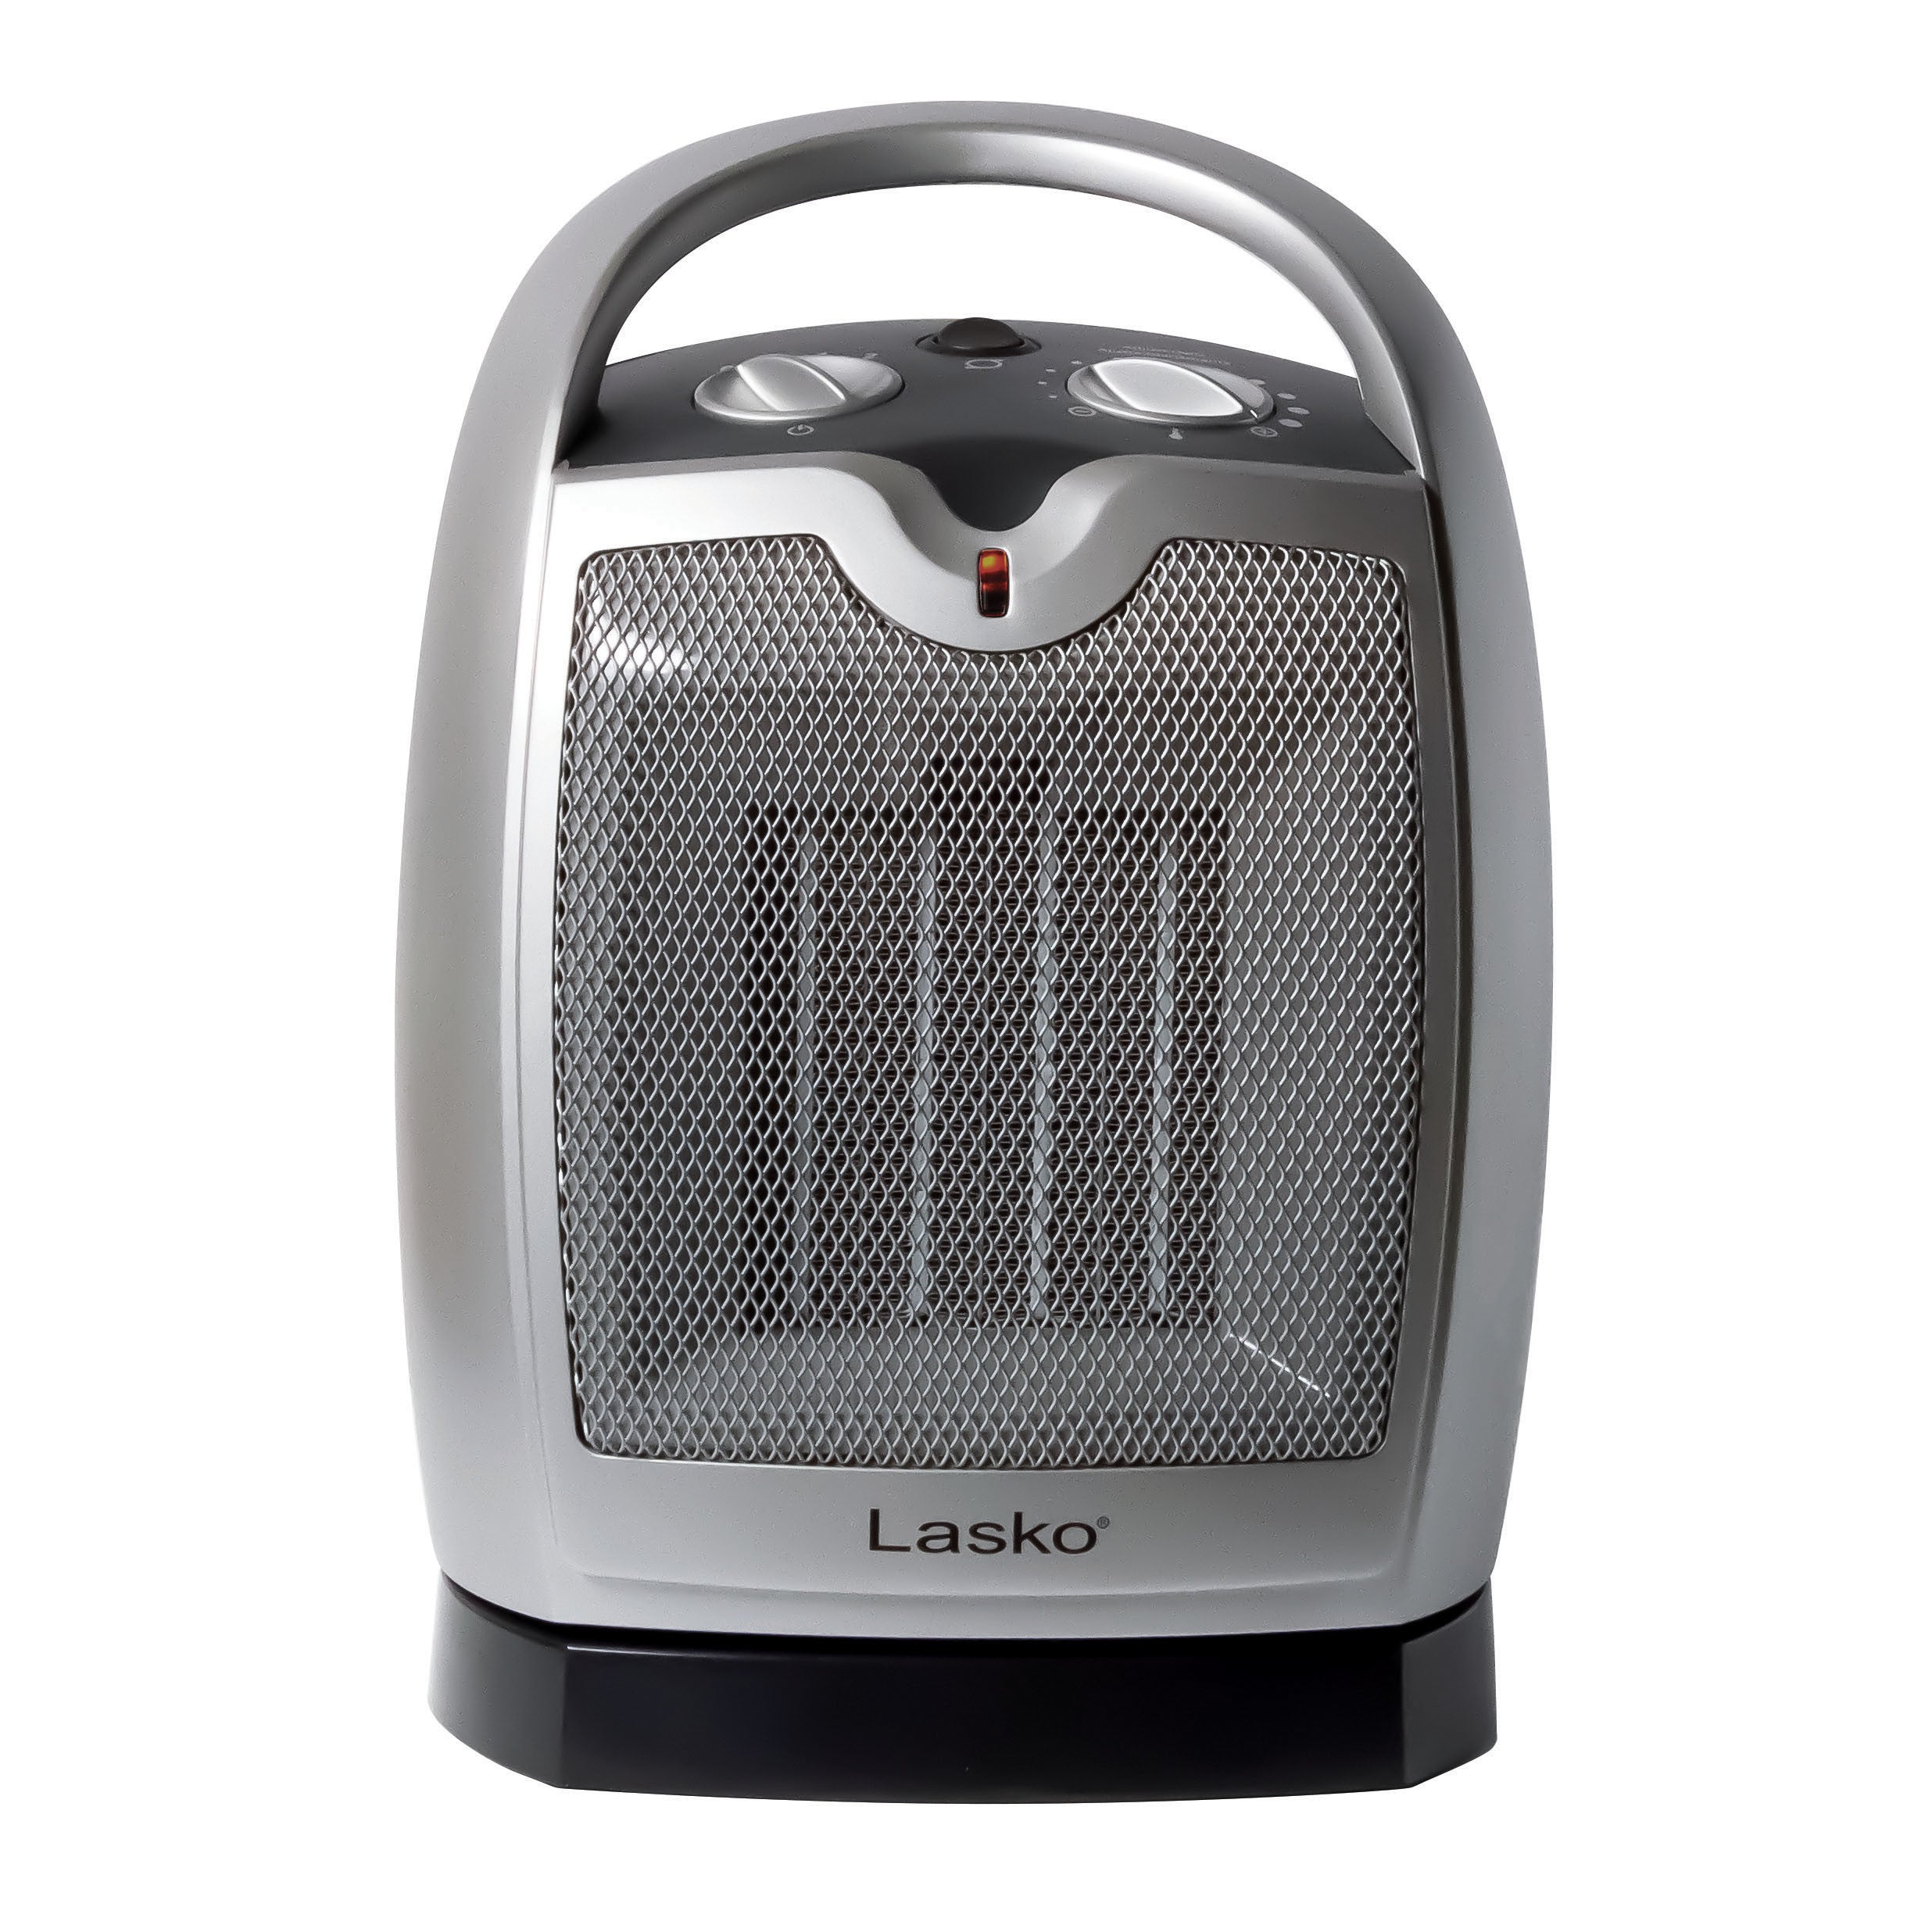 Lasko 1500W Electric Oscillating Ceramic Tabletop Space Heater with Adjustable Thermostat, 5409, Gray